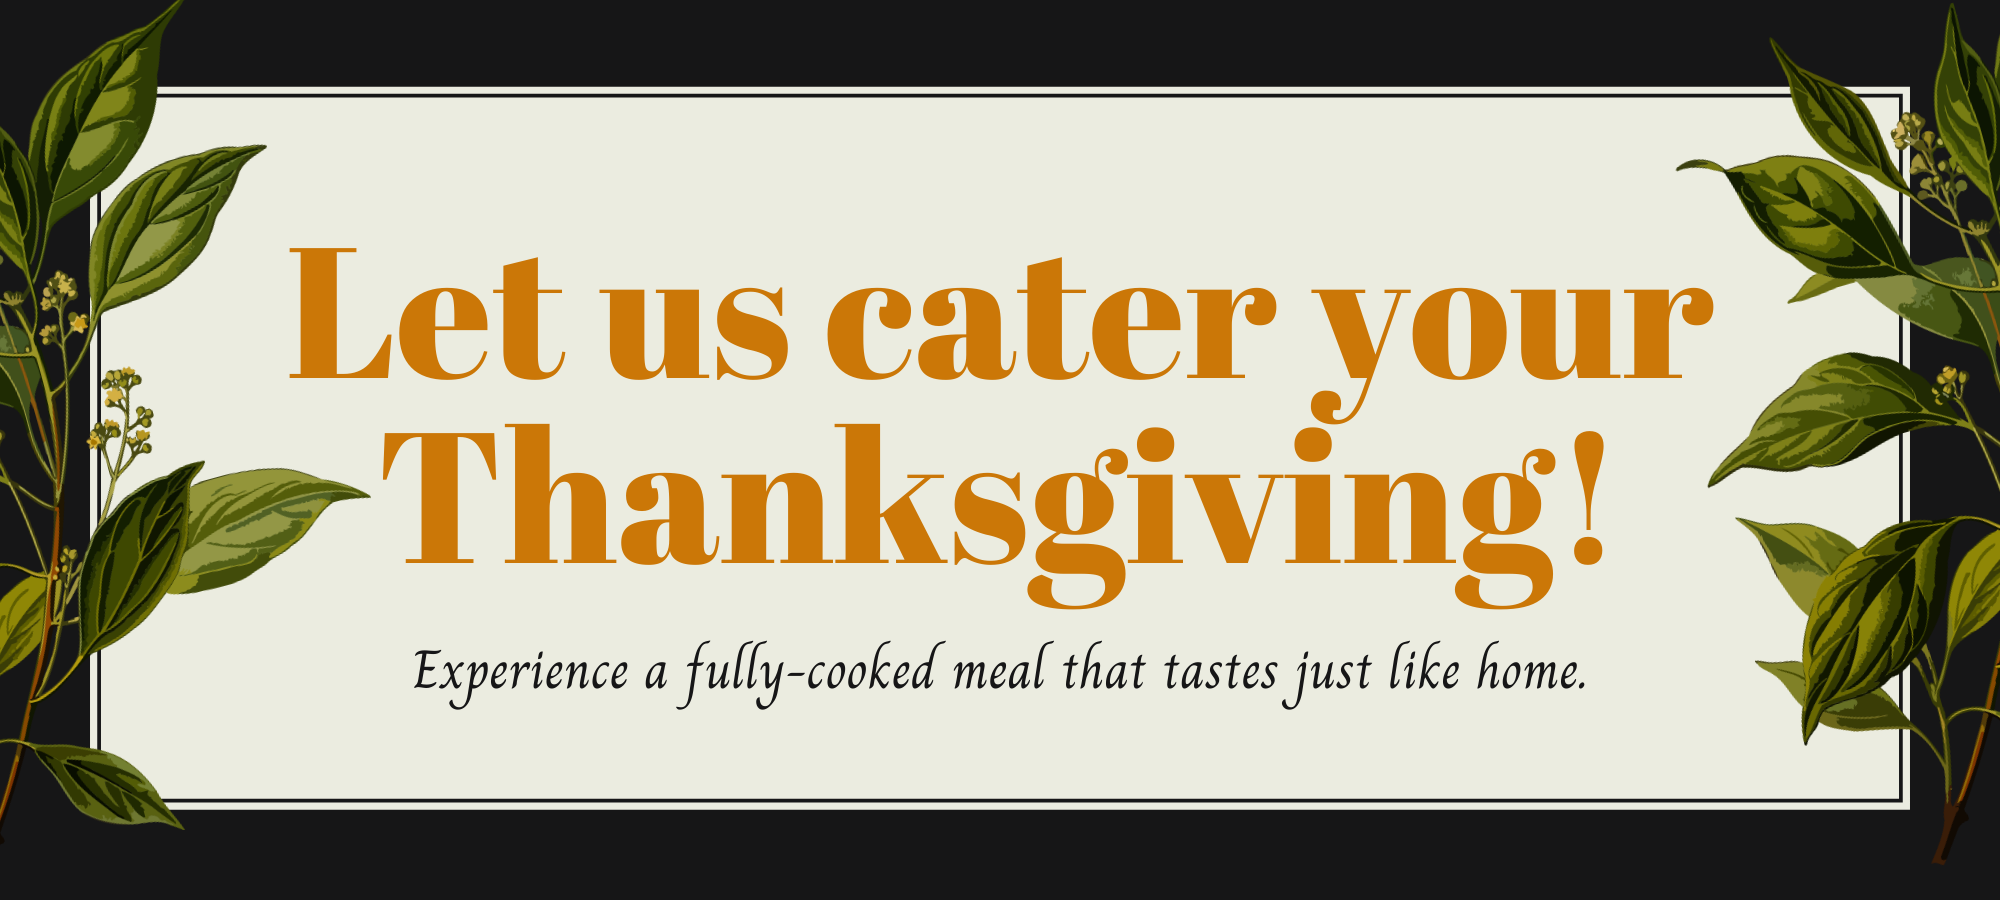 Let us cater your Thanksgiving